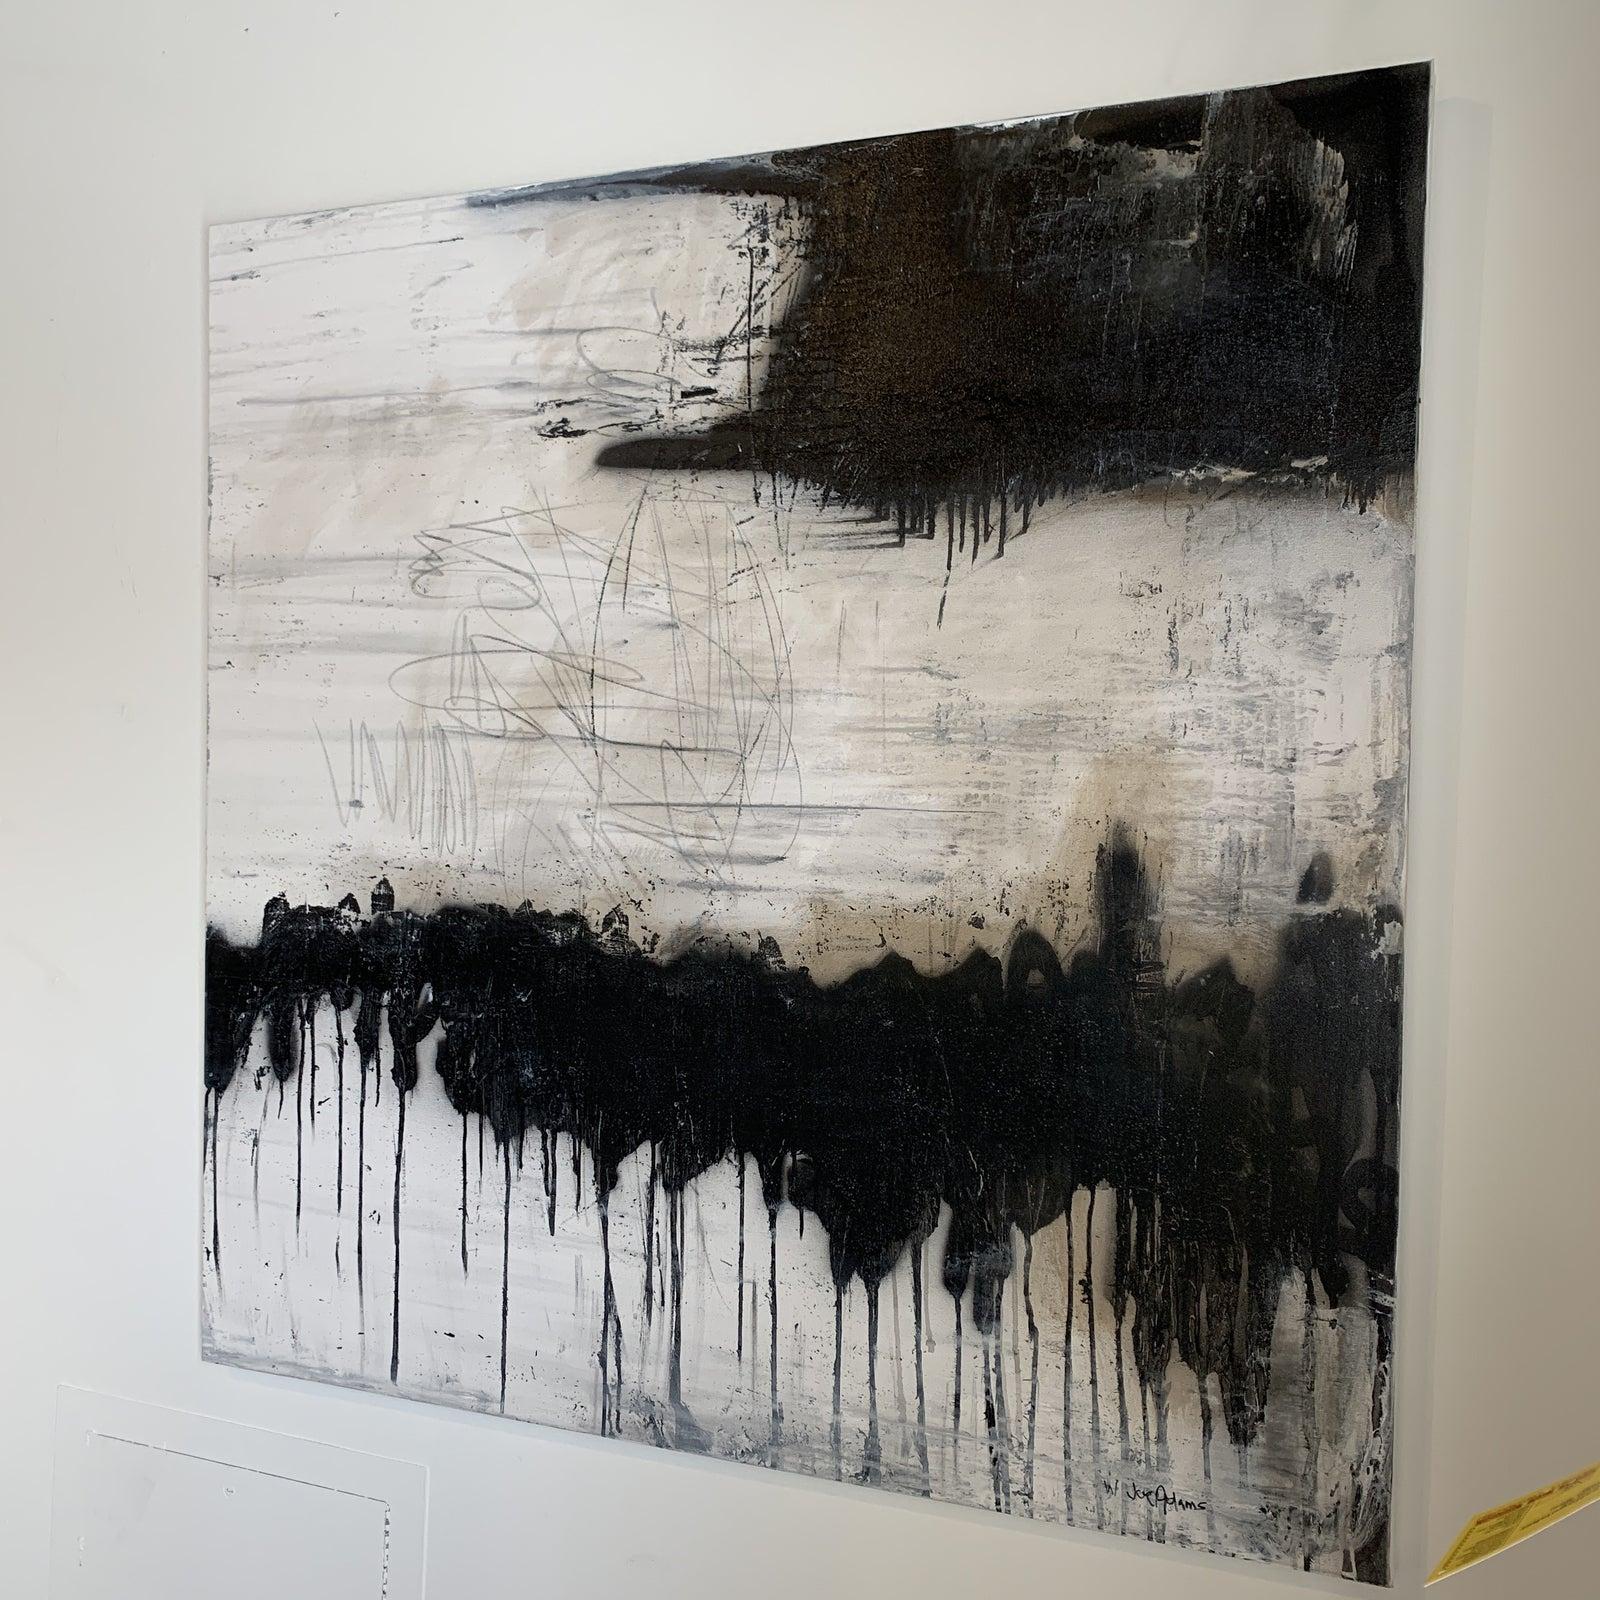 Artist: Joe Adam
Strong Black & White with tad taupe coming through.
48 x 48
Wired and Ready to hang - Gallery wrapped canvas